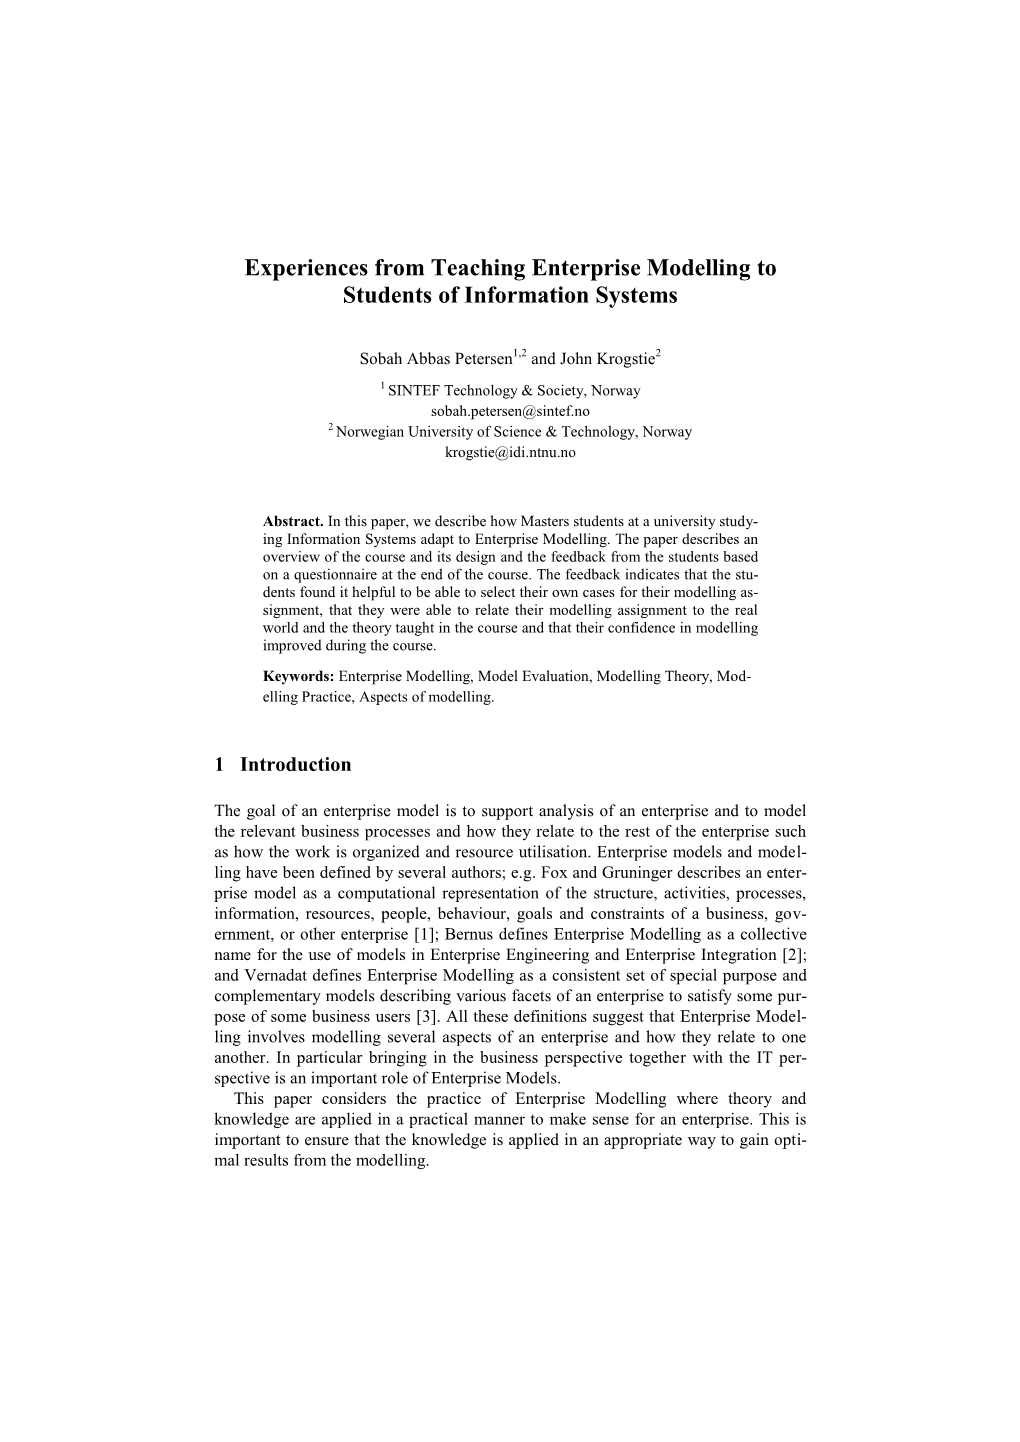 Experiences from Teaching Enterprise Modelling to Students of Information Systems